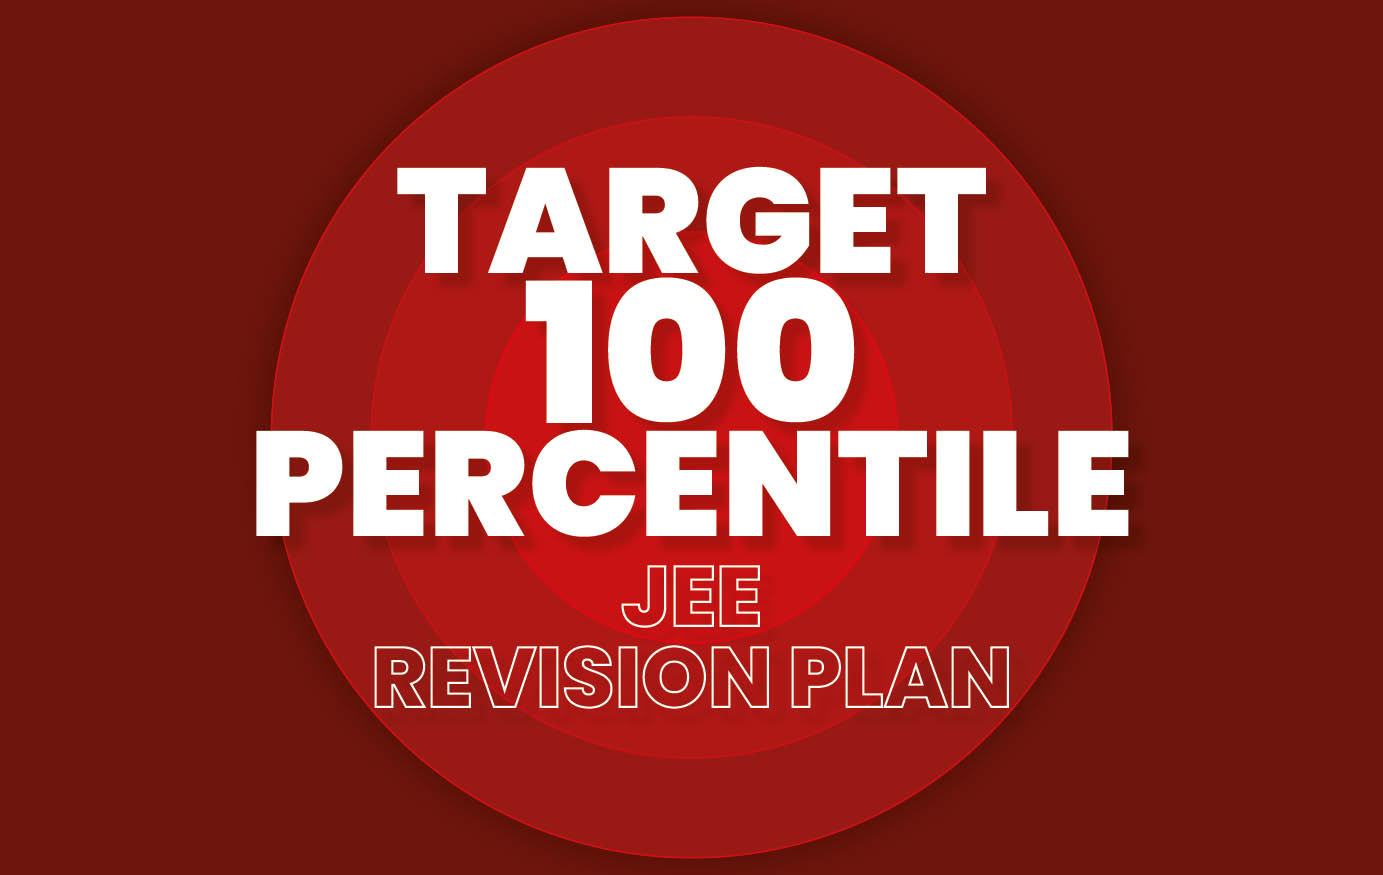 JEE EXPRESS TO 100 PERCENTILE - JEE REVISION PLAN